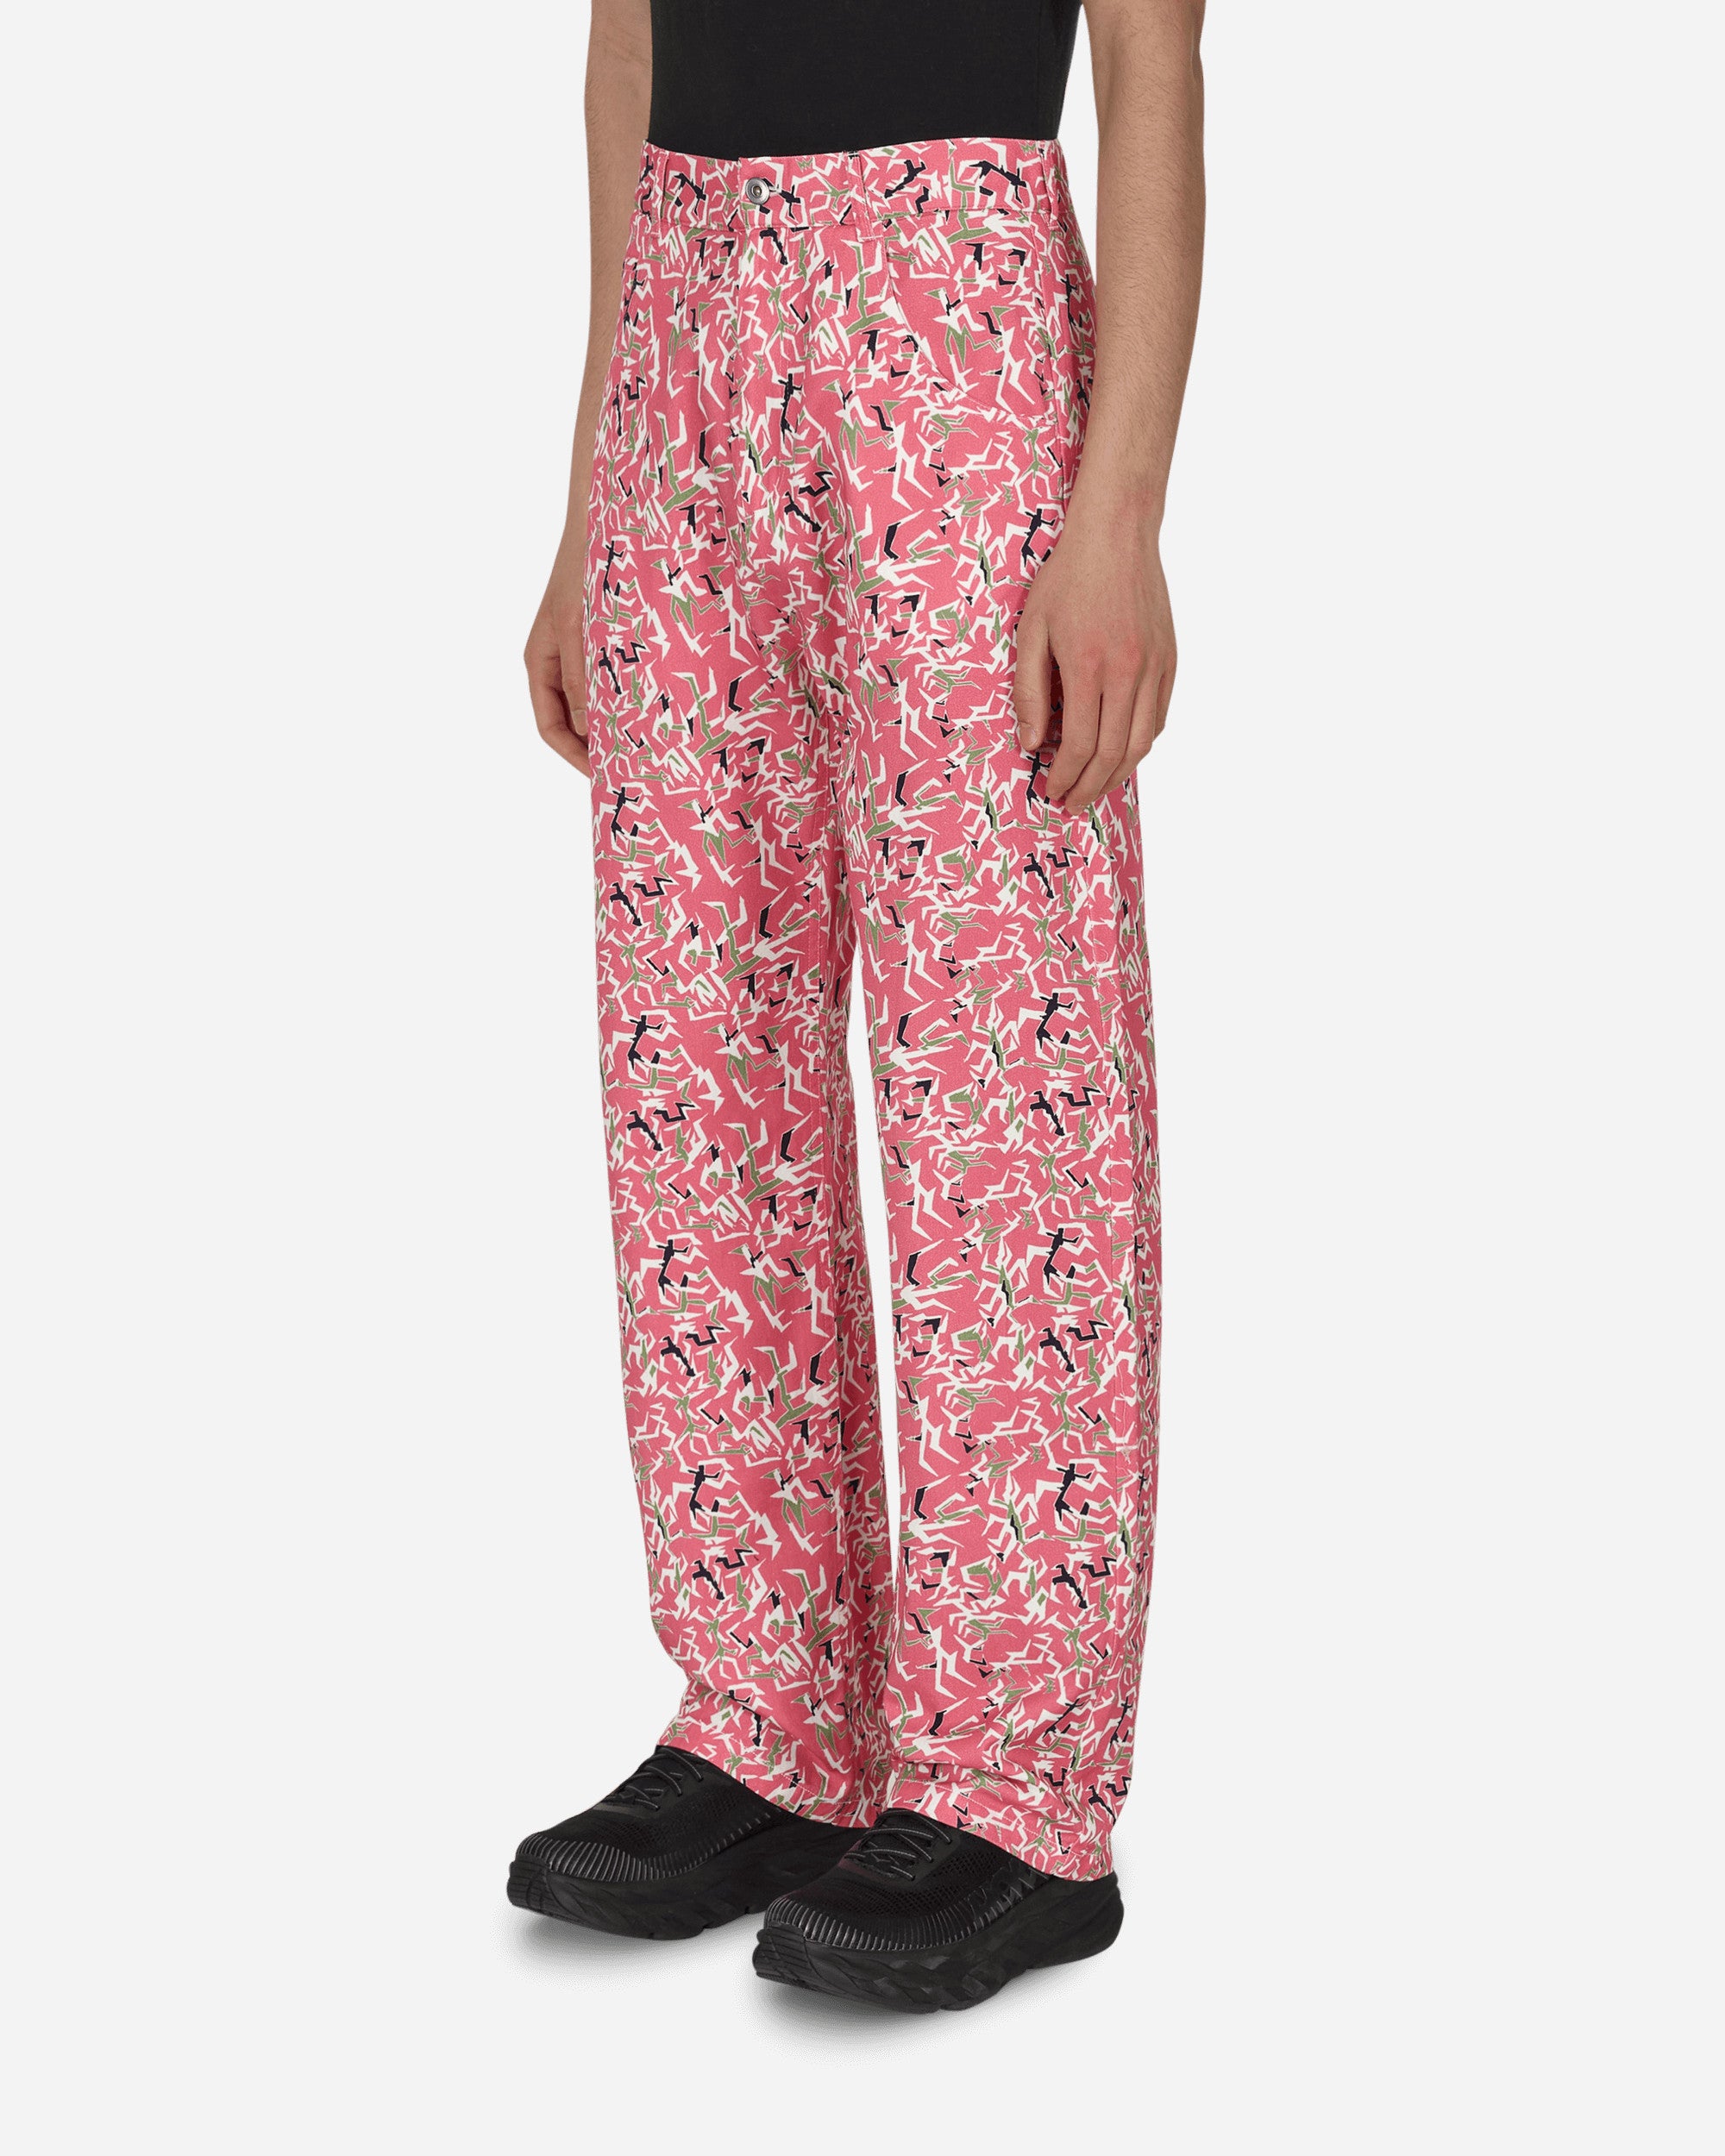 Paccbet Workwear Floral Pants Woven Pink Pants Trousers PACC10P007 1